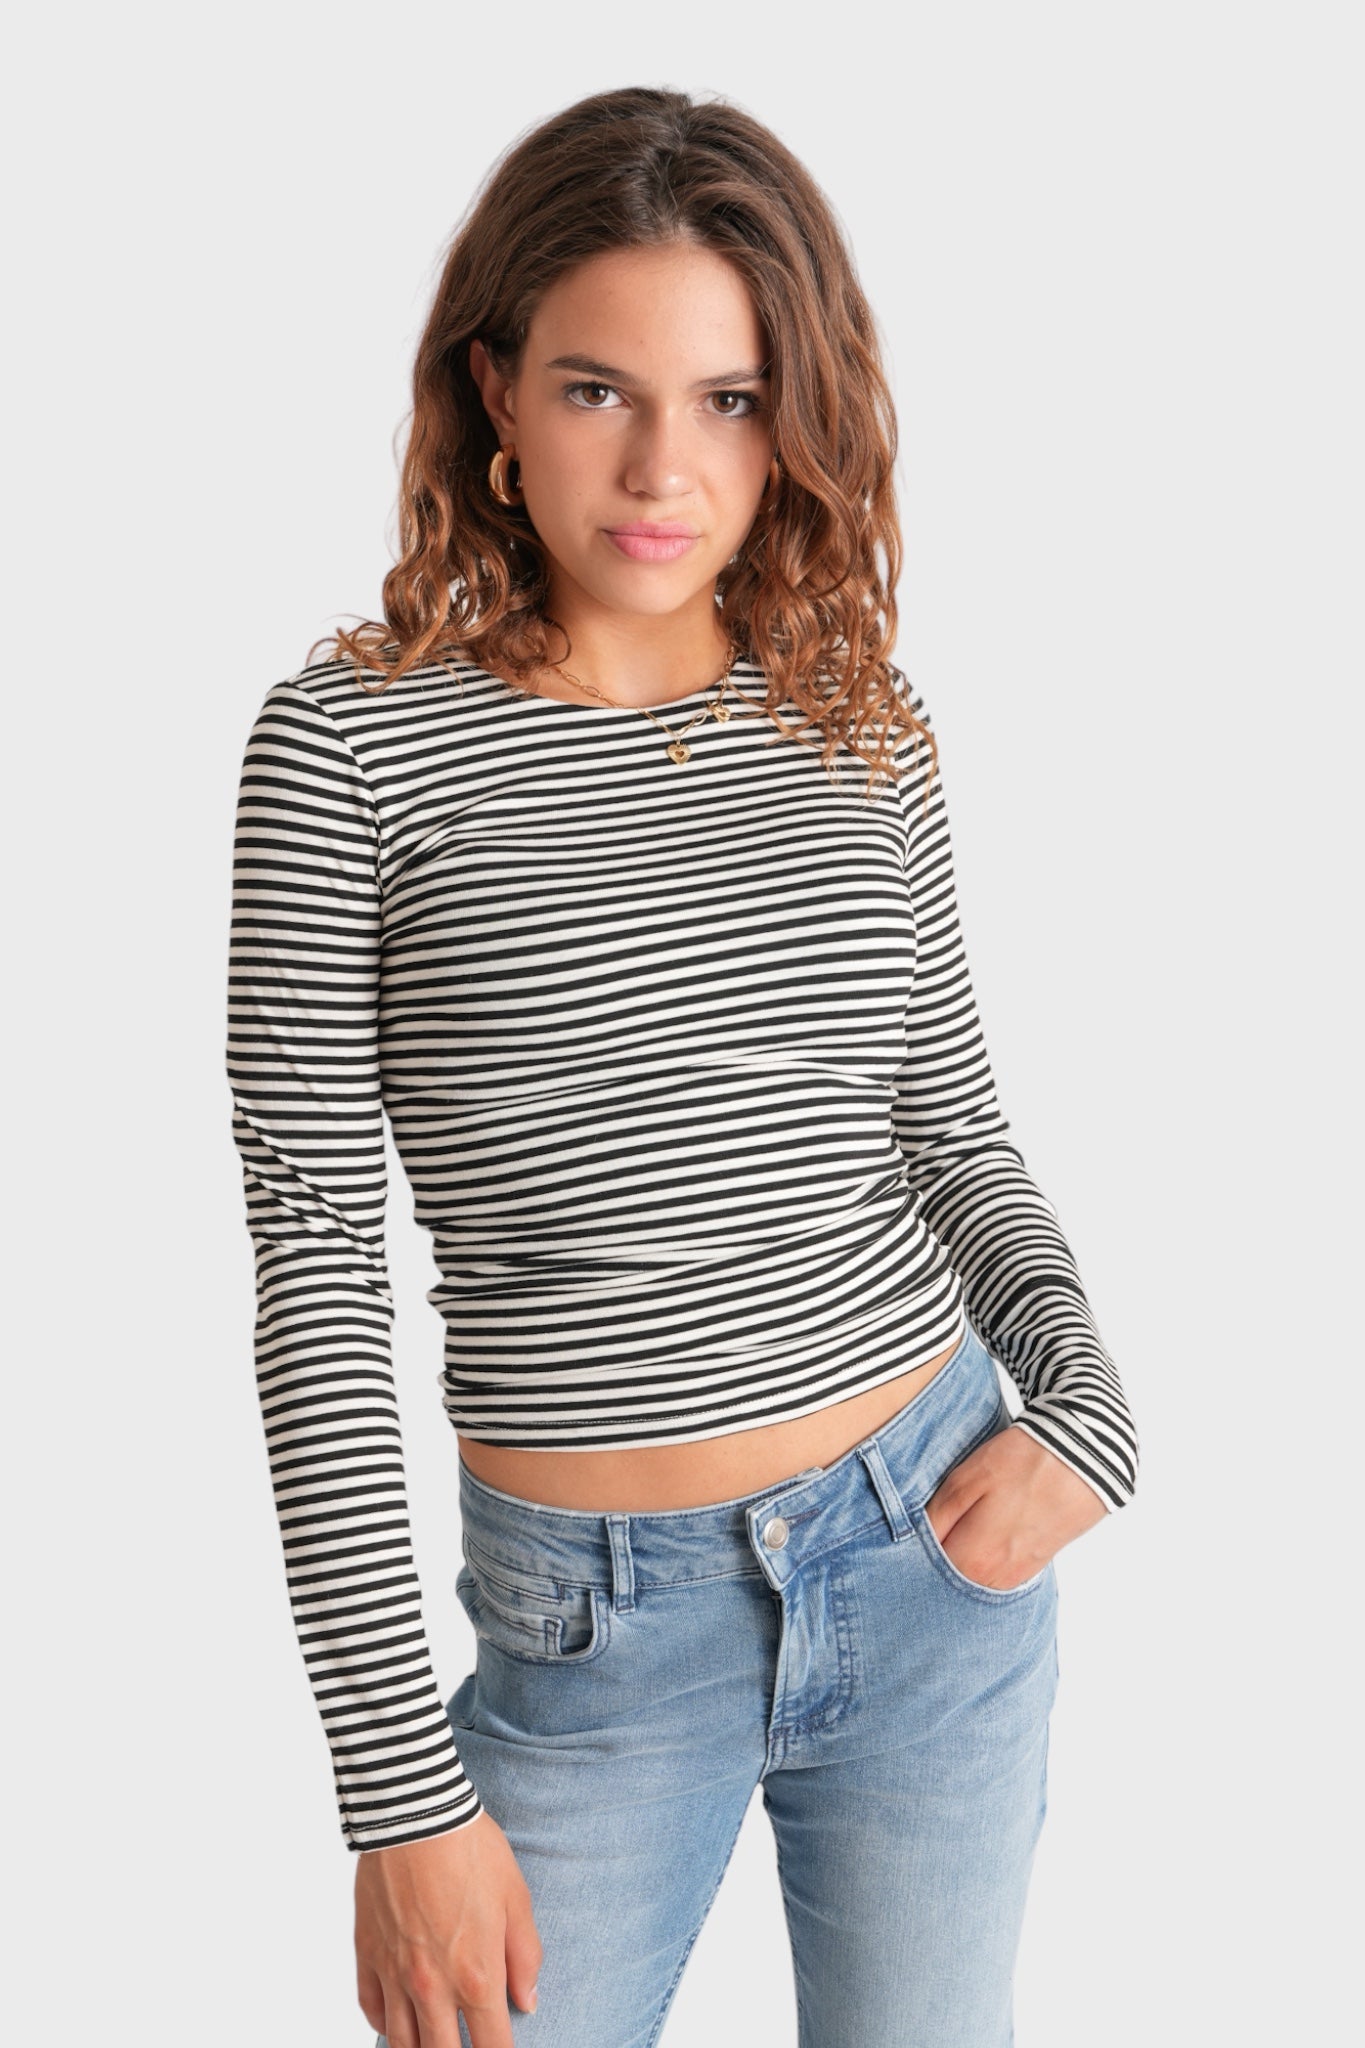 "Muse" top striped black